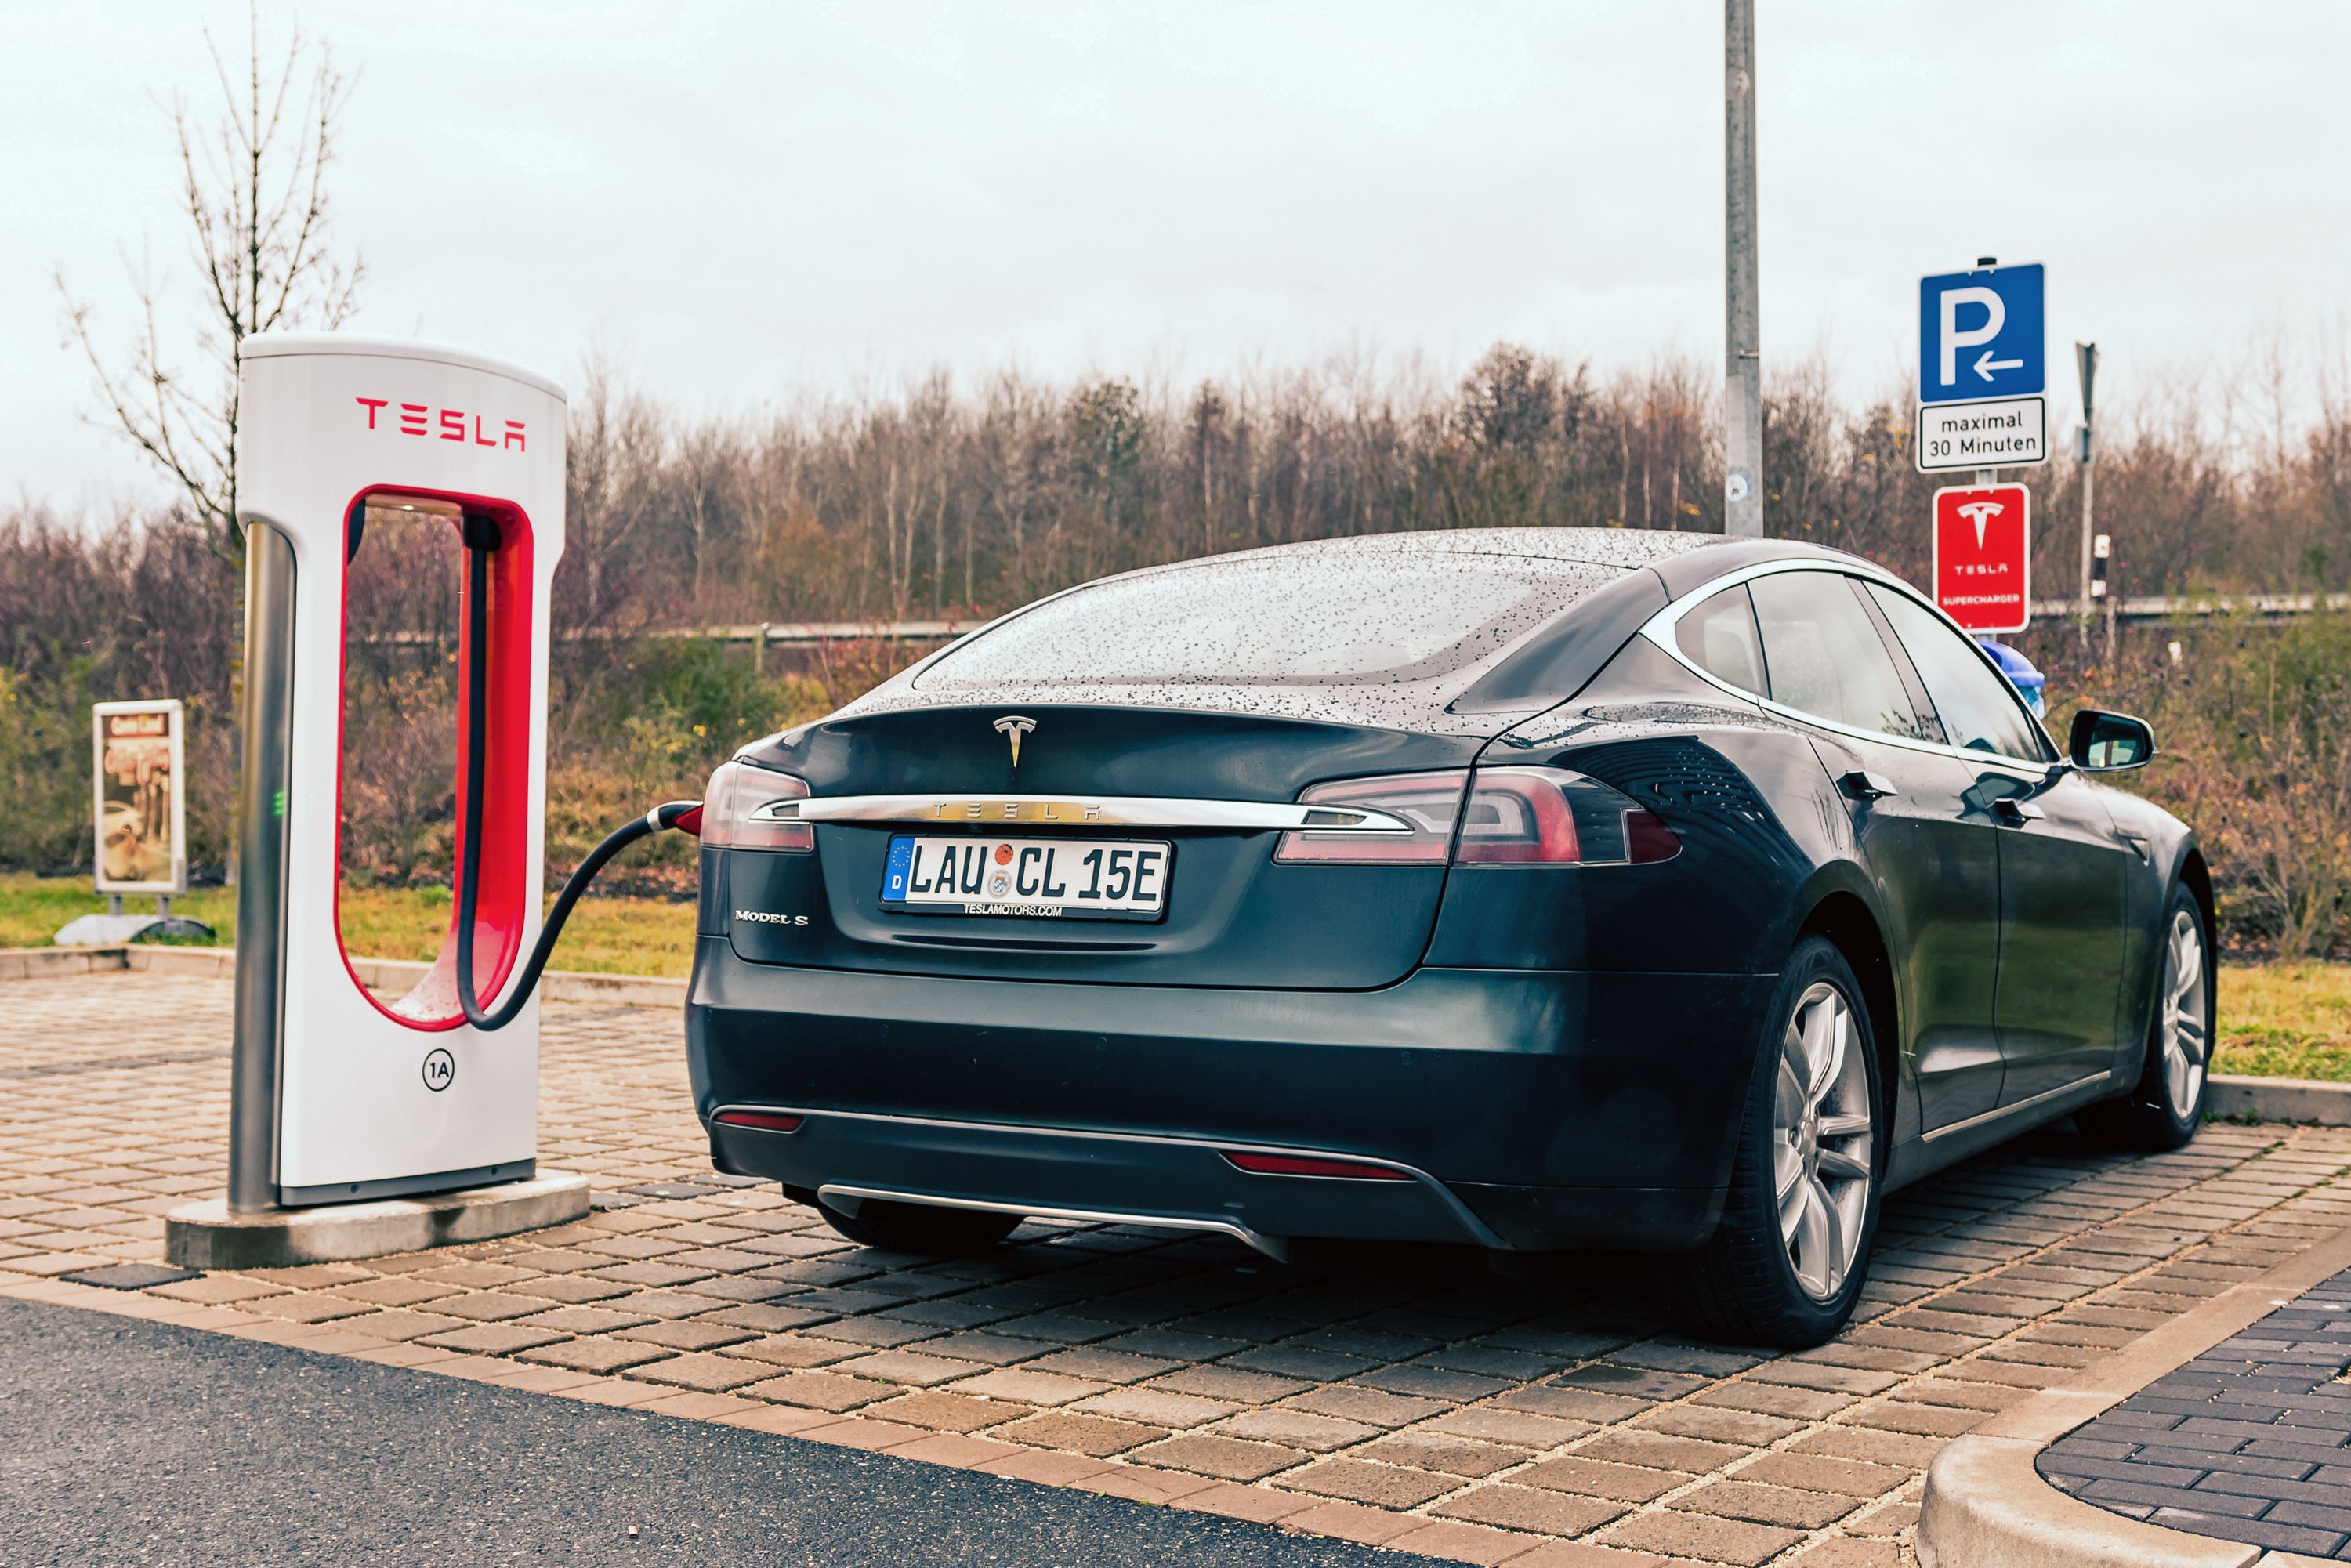 Model_S_charging_at_a_Tesla_Supercharger_station_in_Germany_crooped